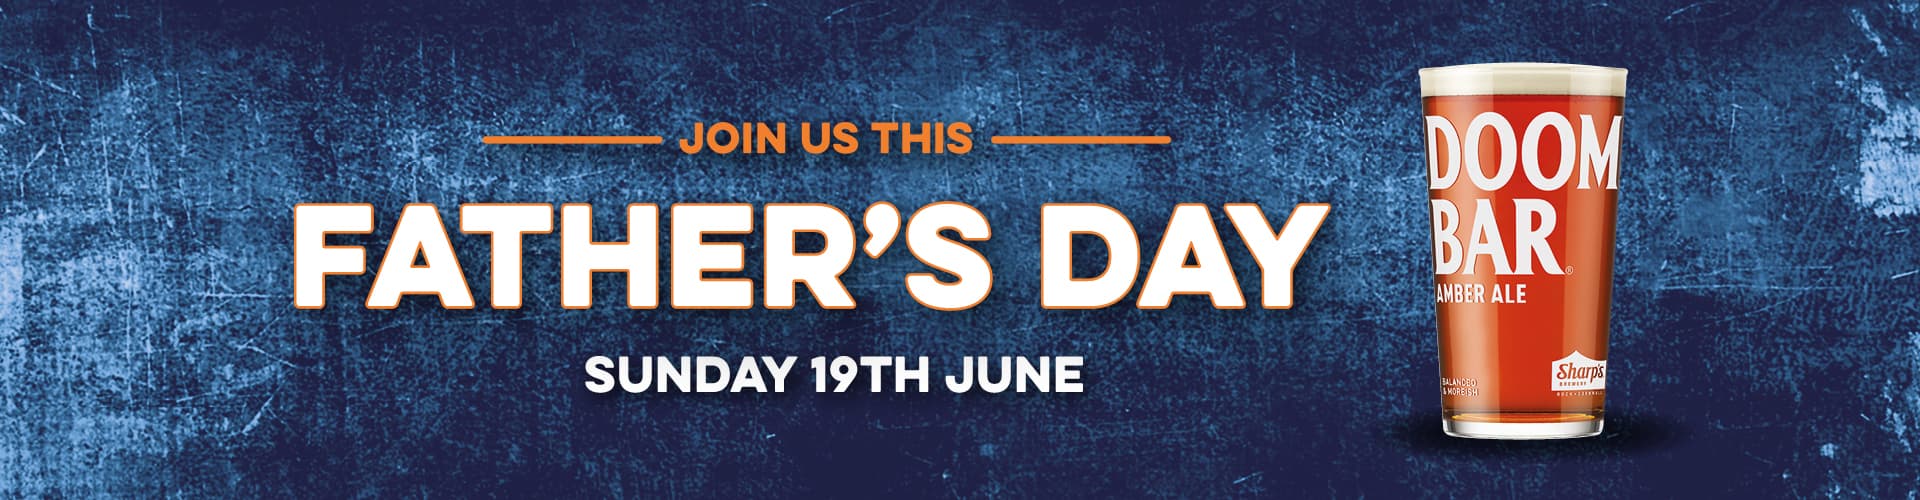 Father's Day at Charles XII pub in York